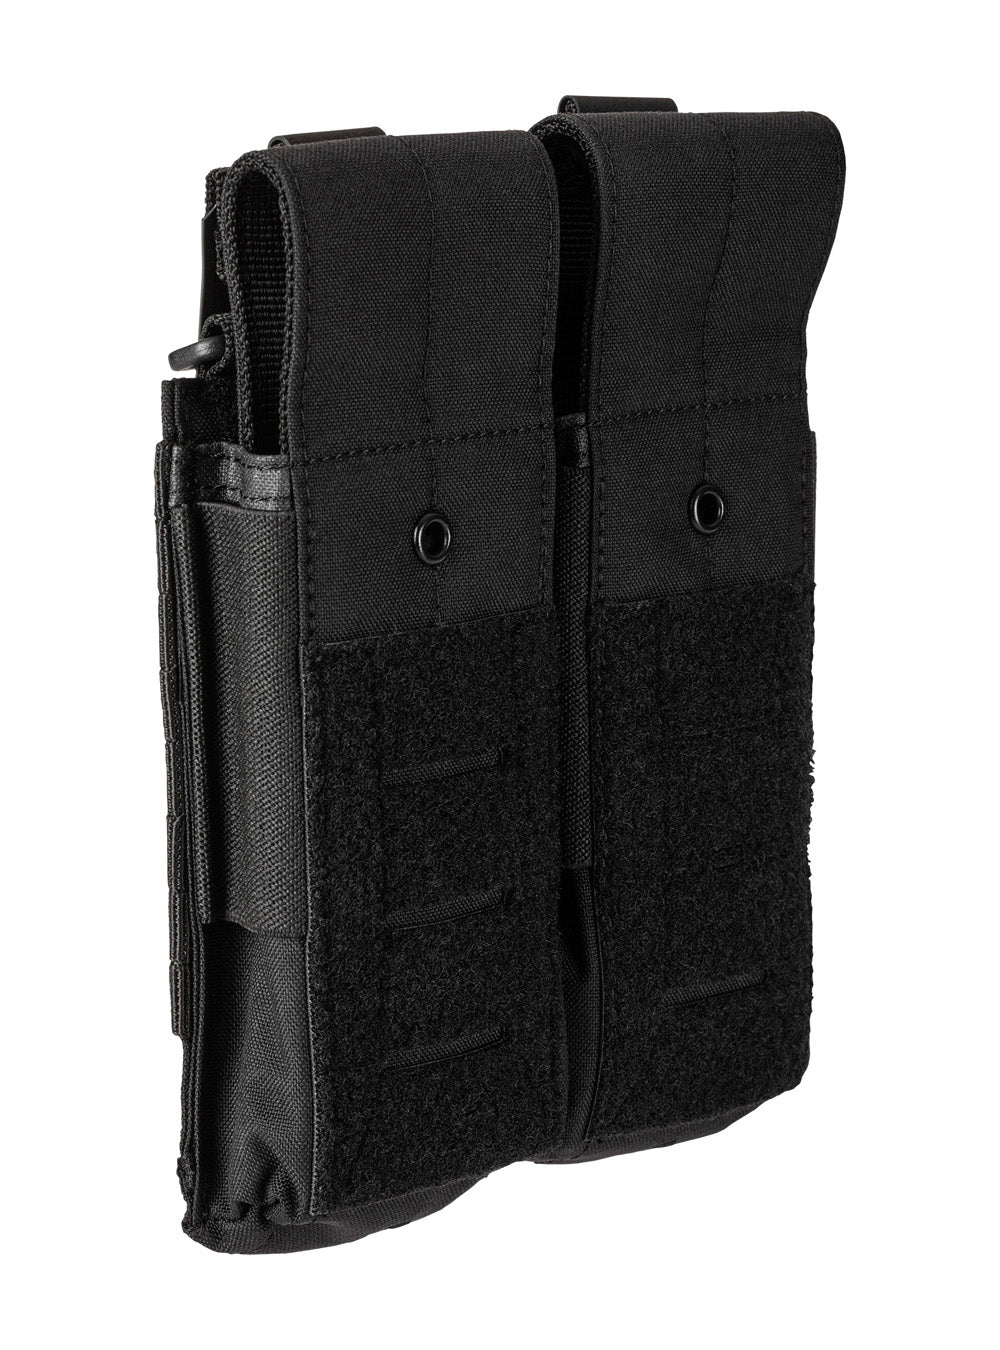 5.11 Tactical Flex Double AR Mag Pouch Cover